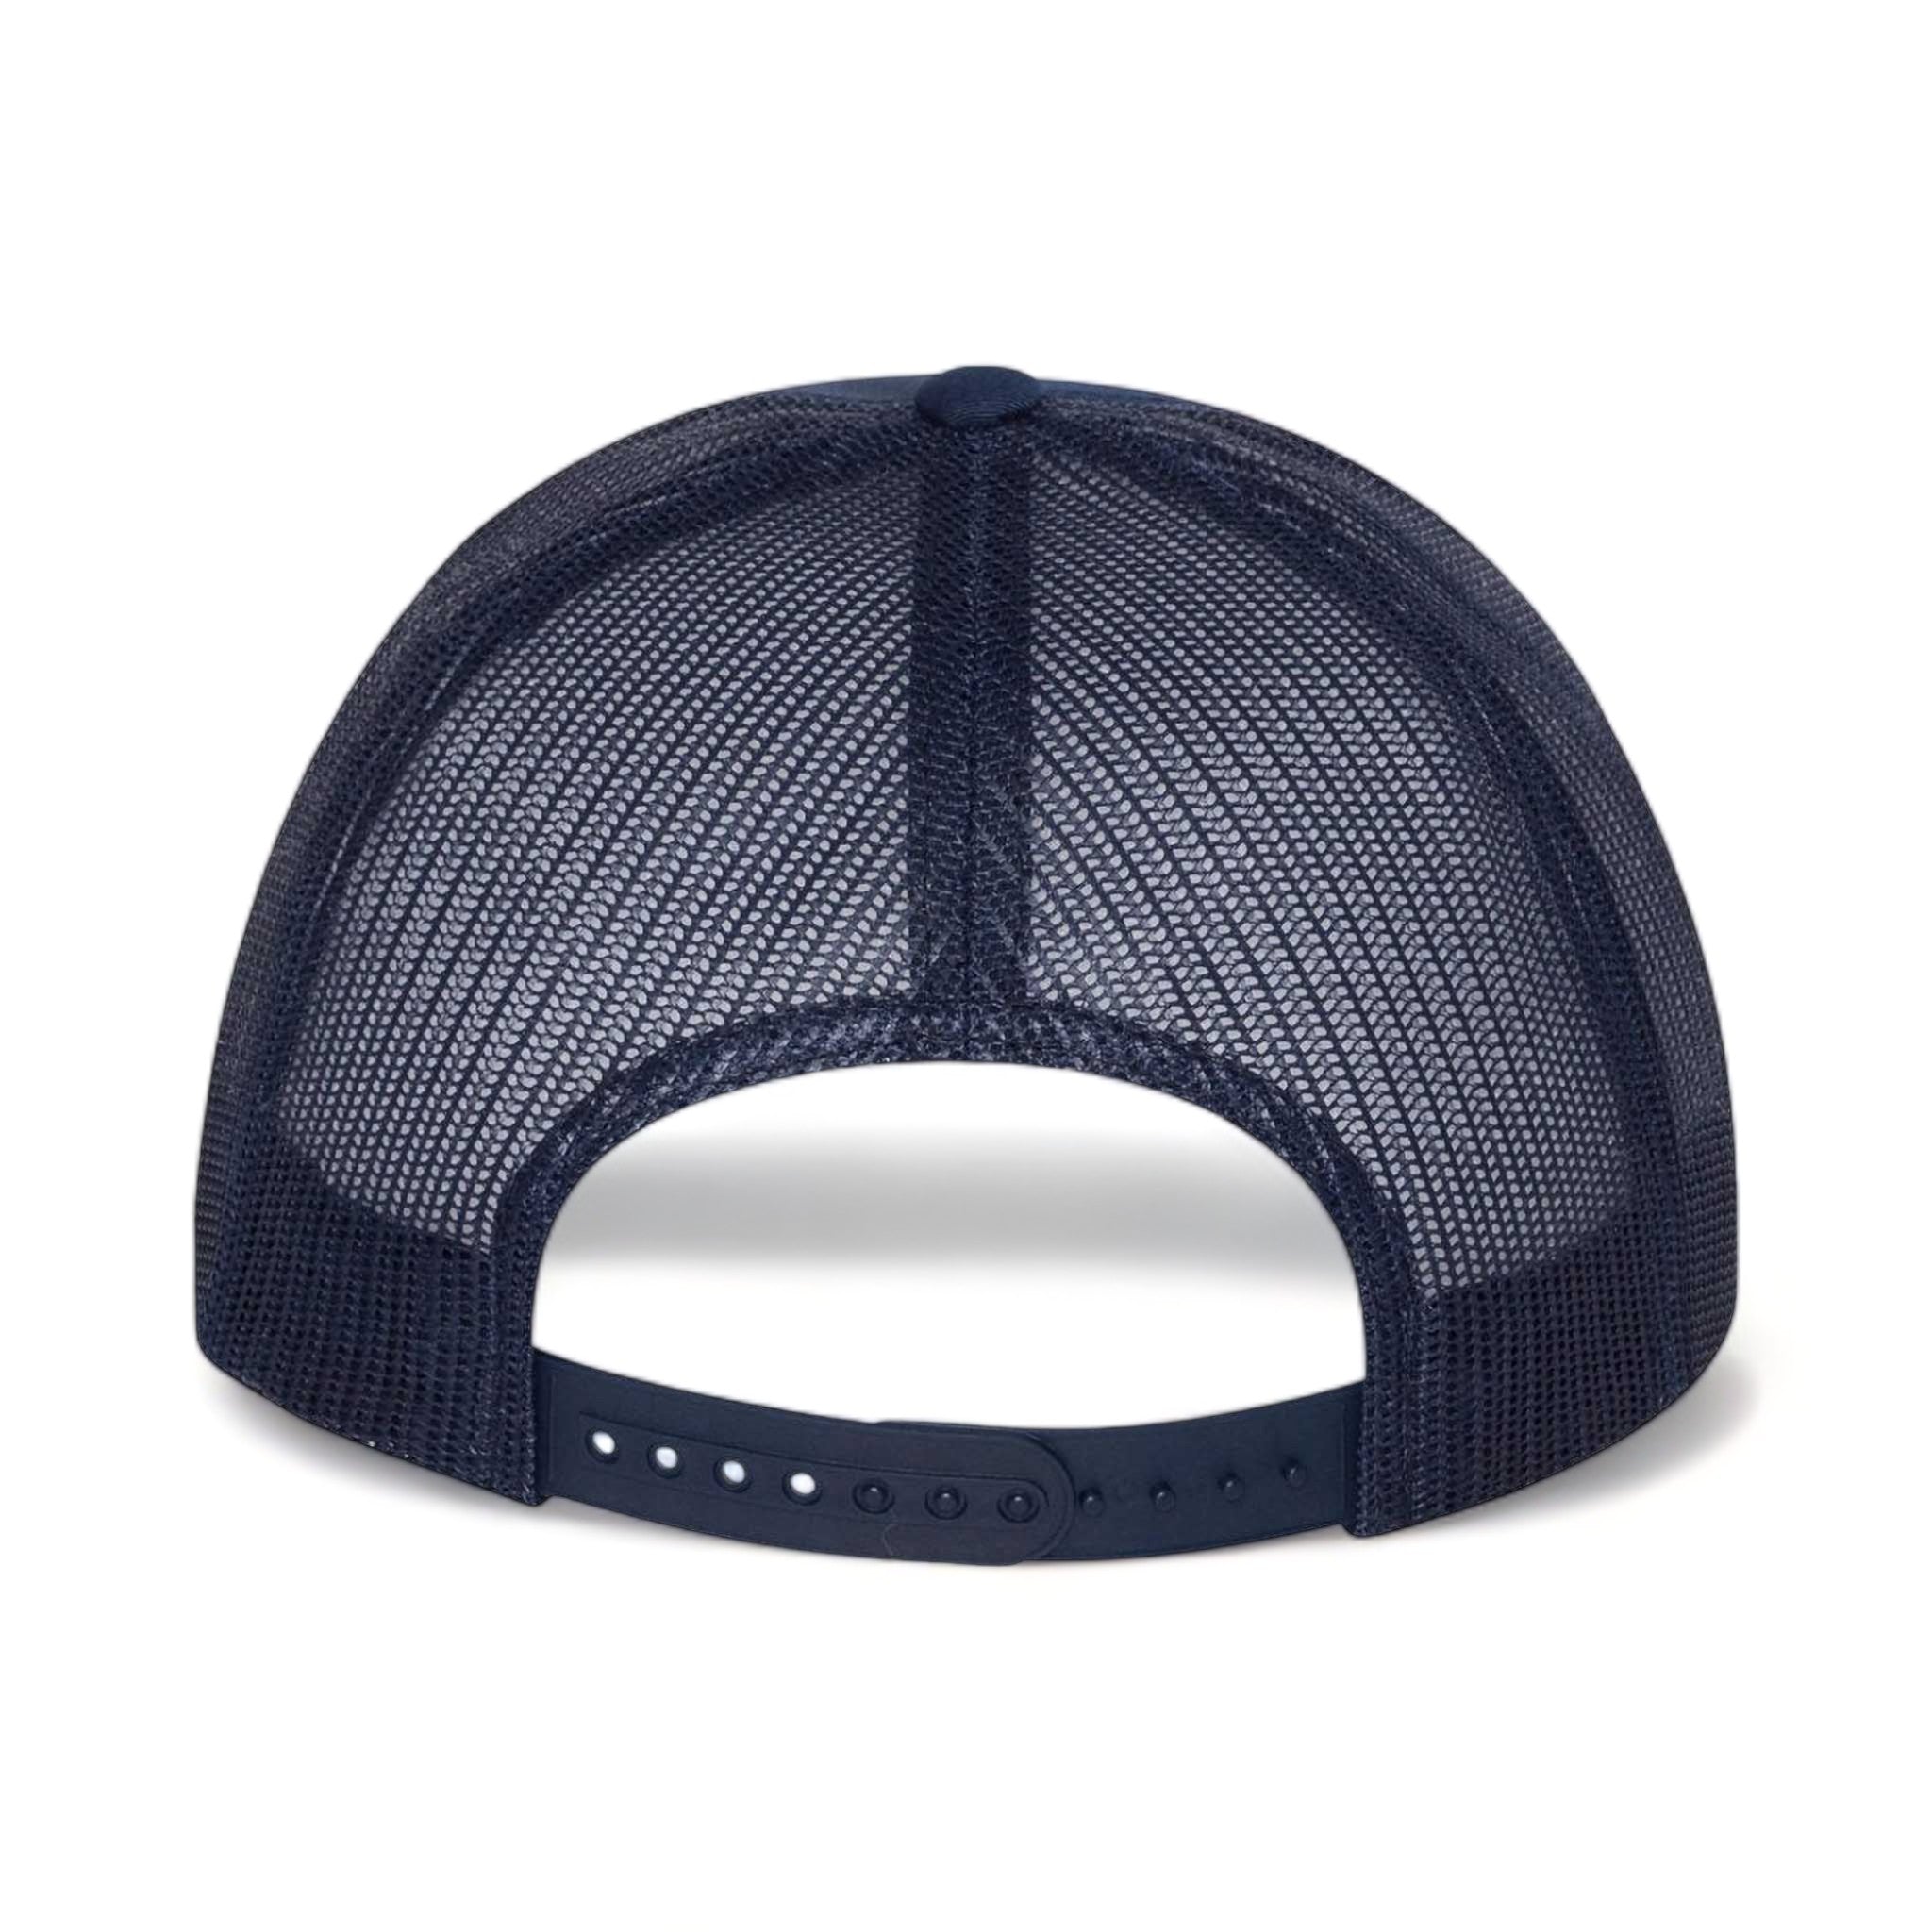 Back view of YP Classics 6006 custom hat in navy